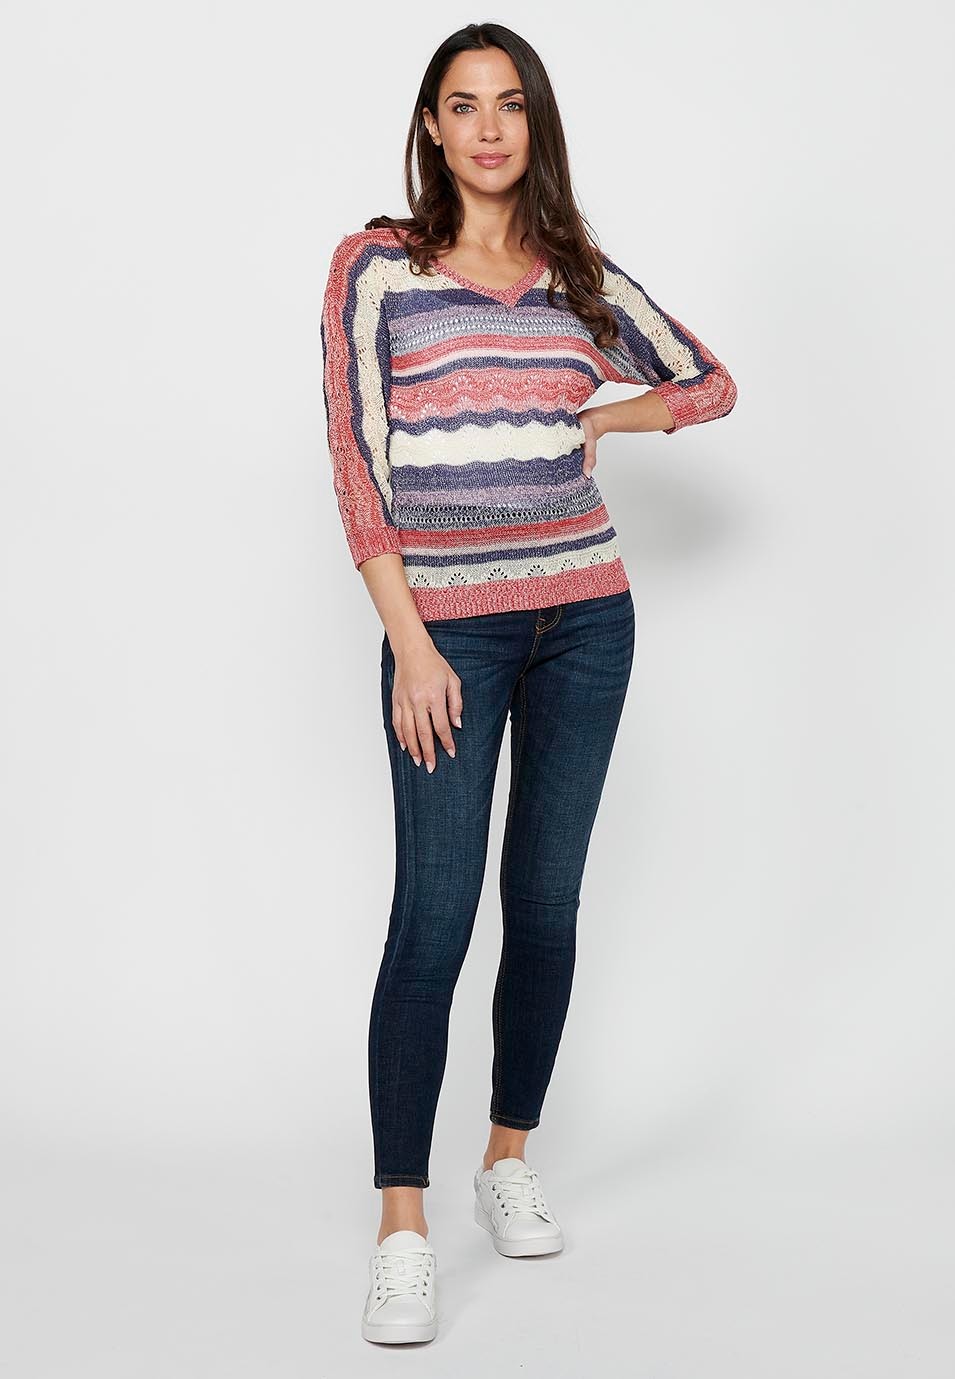 Medium sleeve sweater with V-neck. Multicolor Striped Openwork Tricot for Women 4